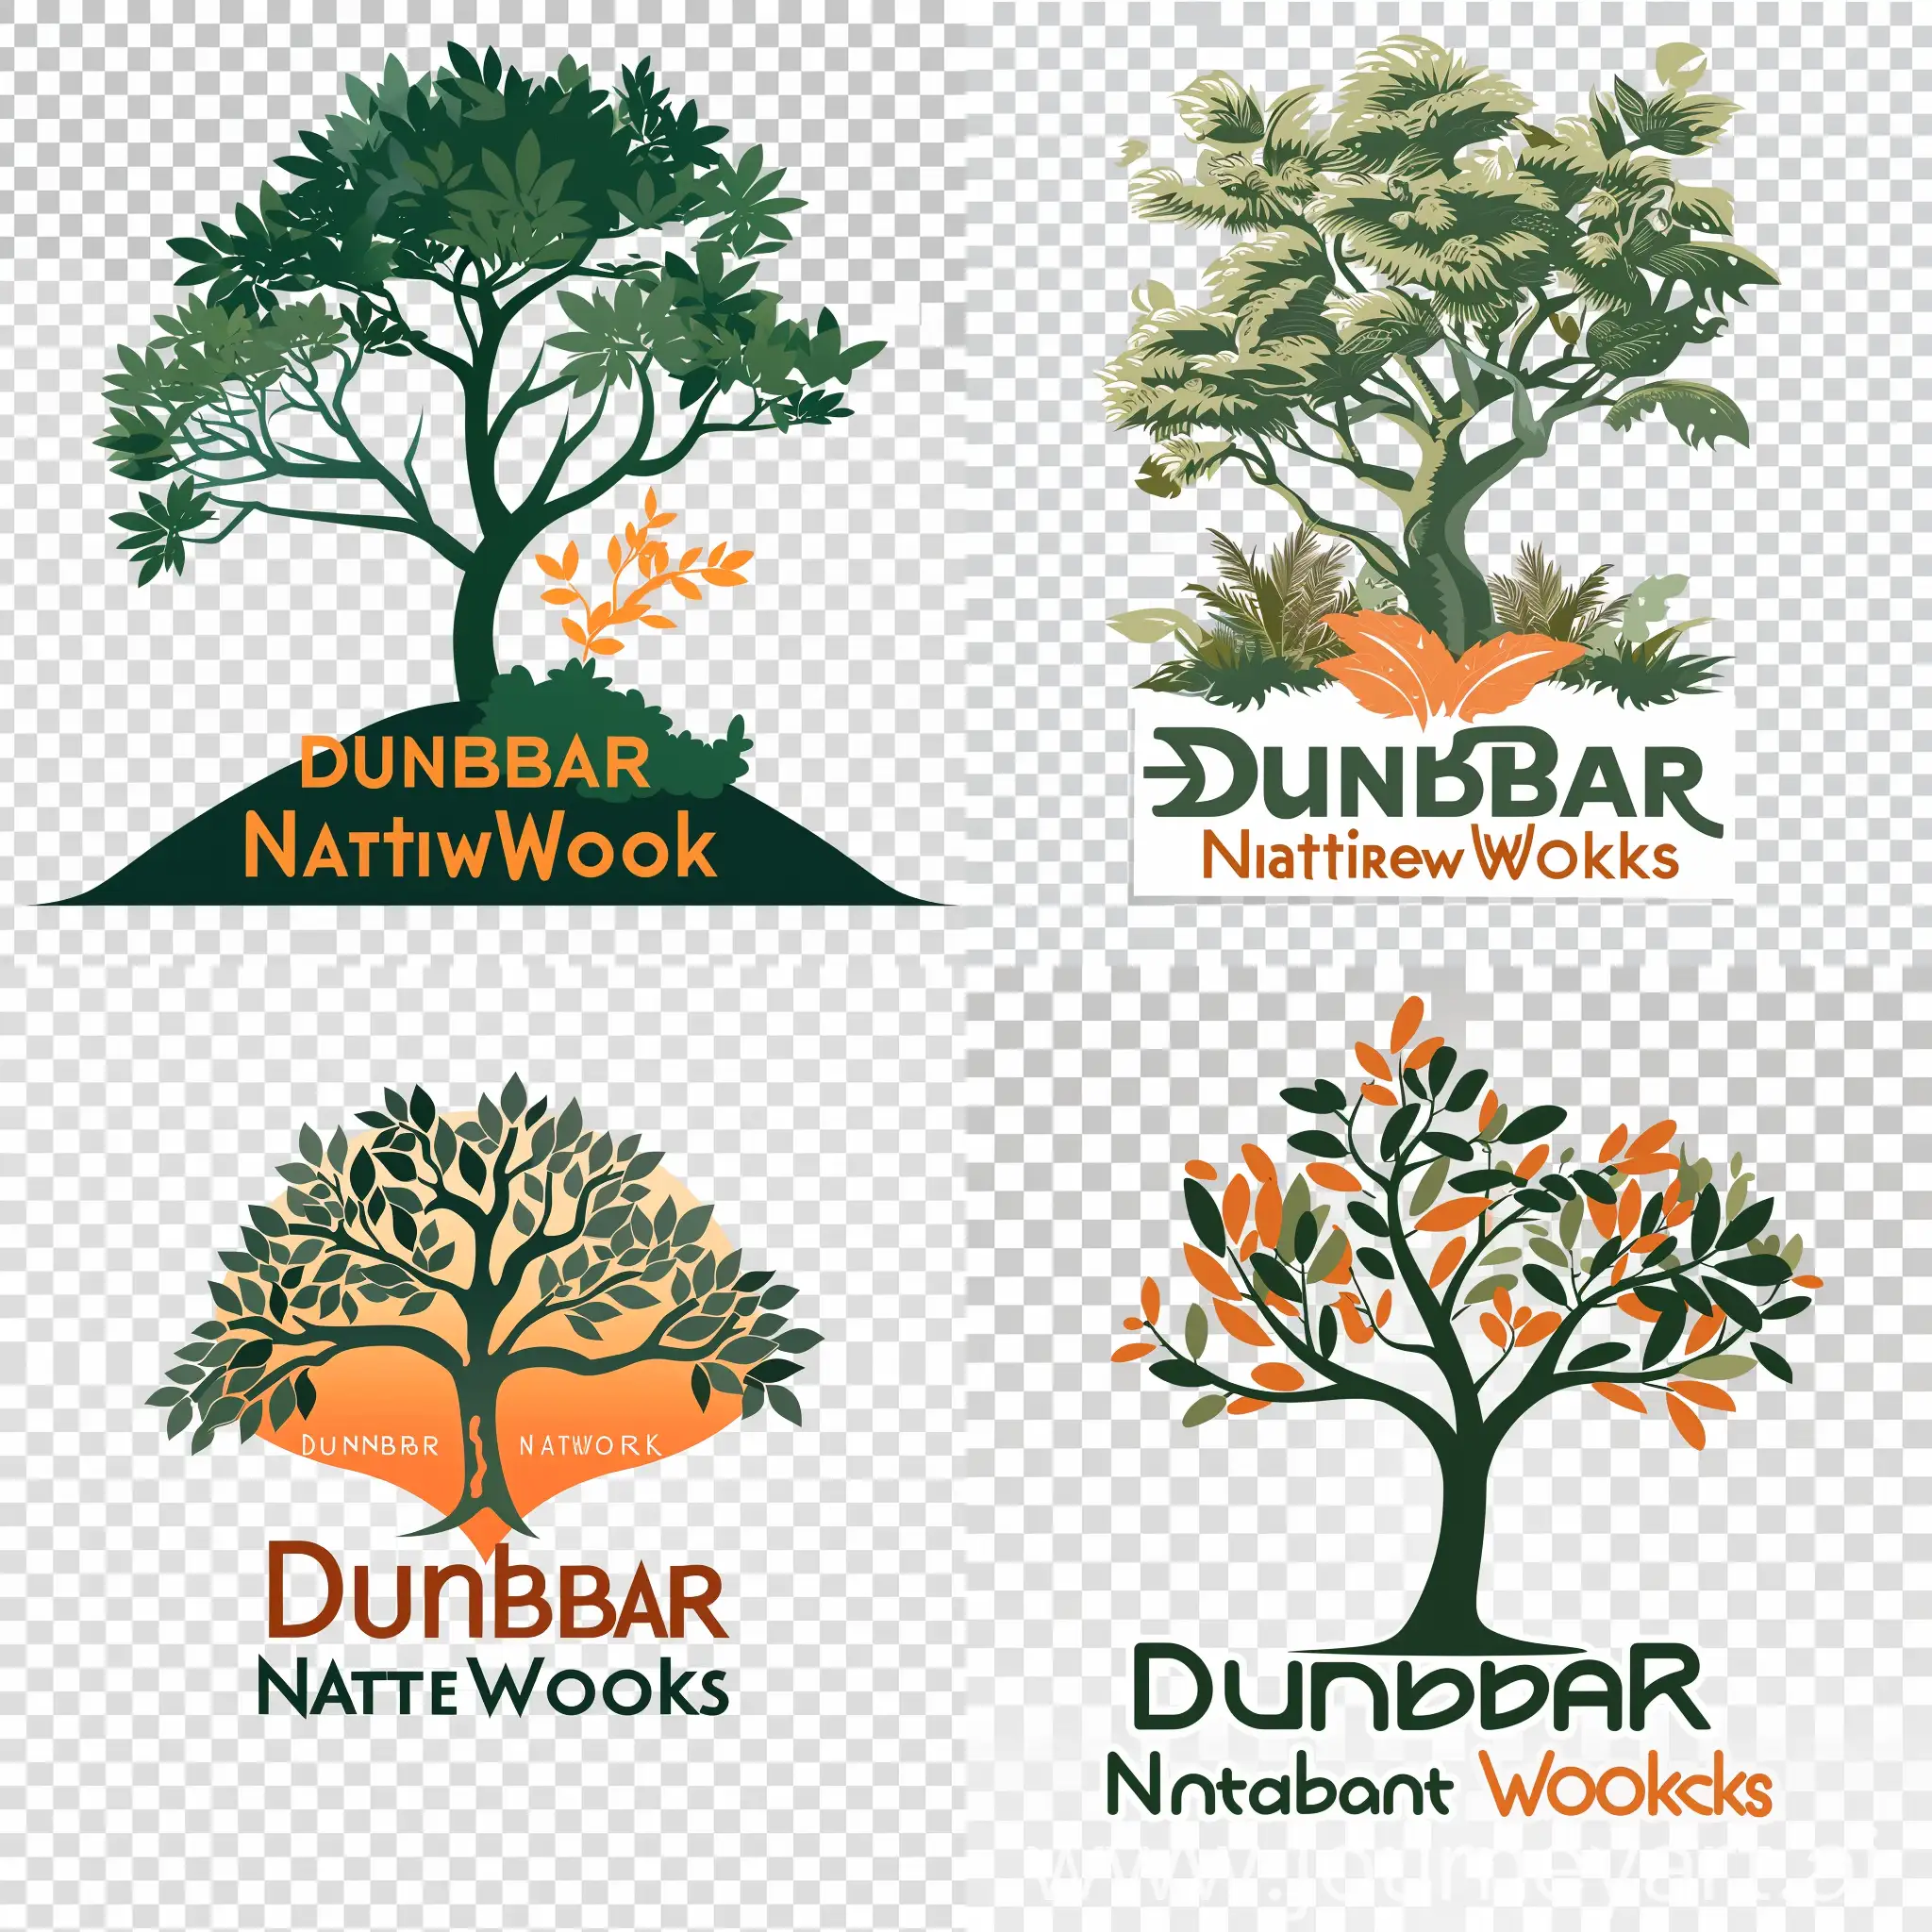 Design a visually captivating logo for "Dunbar NatureWorks," featuring a stylized tree with lush foliage to symbolize nature and growth, set against a transparent background. Beneath the tree, use a clean and modern font to write "Dunbar" in a bold green color, representing the landscape aspect, and "NatureWorks" in a warm orange tone, suggesting creativity and innovation. Ensure the design is simple yet elegant, aiming for a visually appealing and memorable logo that reflects the essence of the business while maintaining transparency for versatile application across various media.